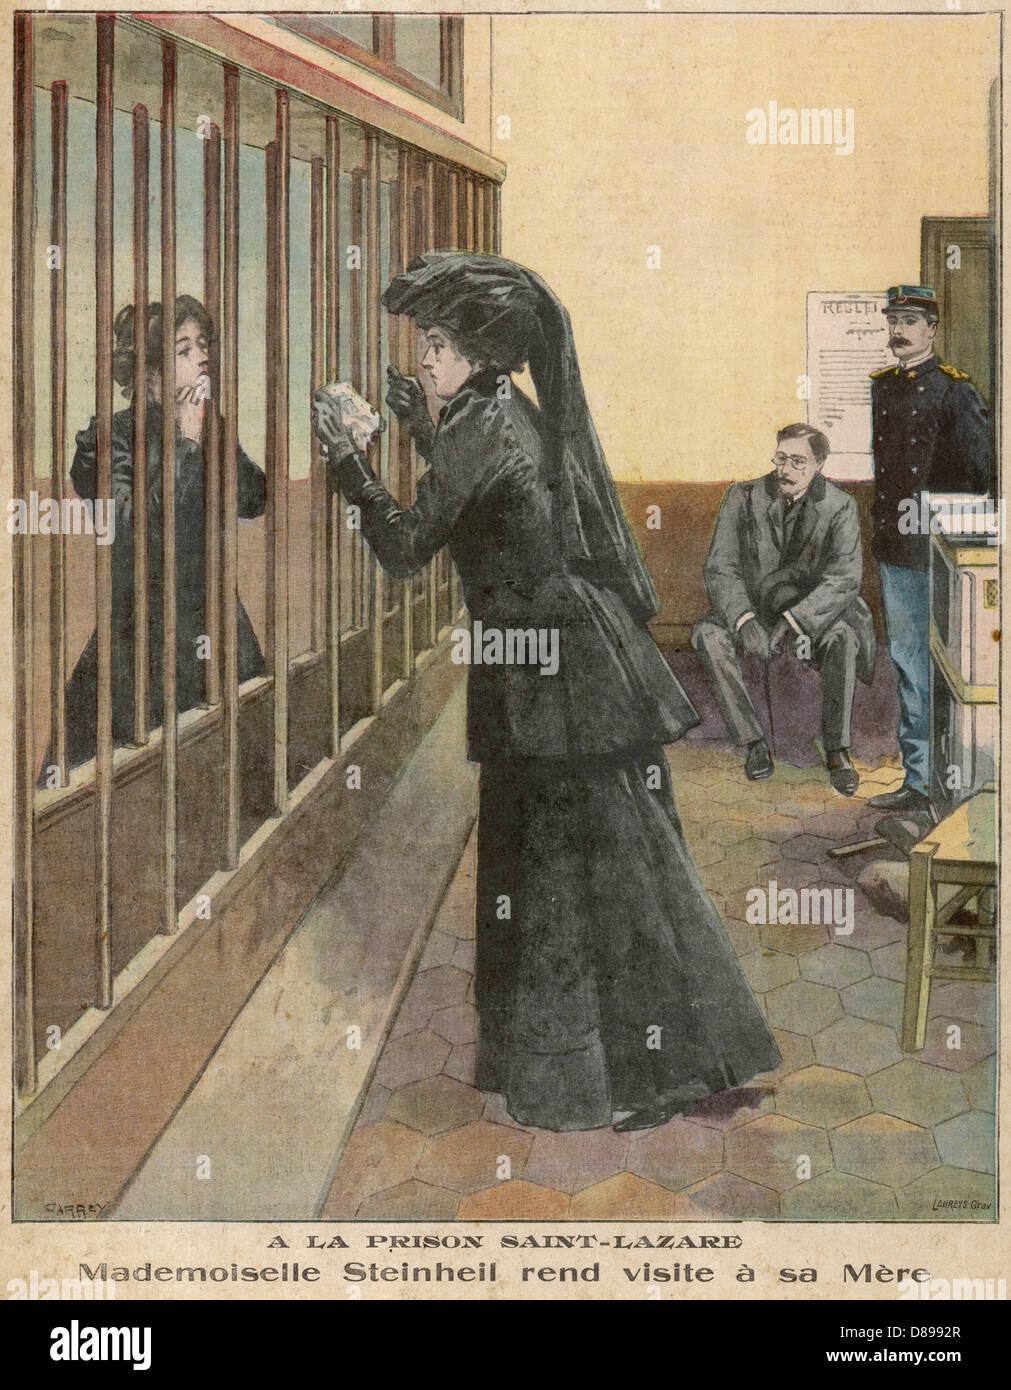 Saint lazare prison hi-res stock photography and images - Alamy